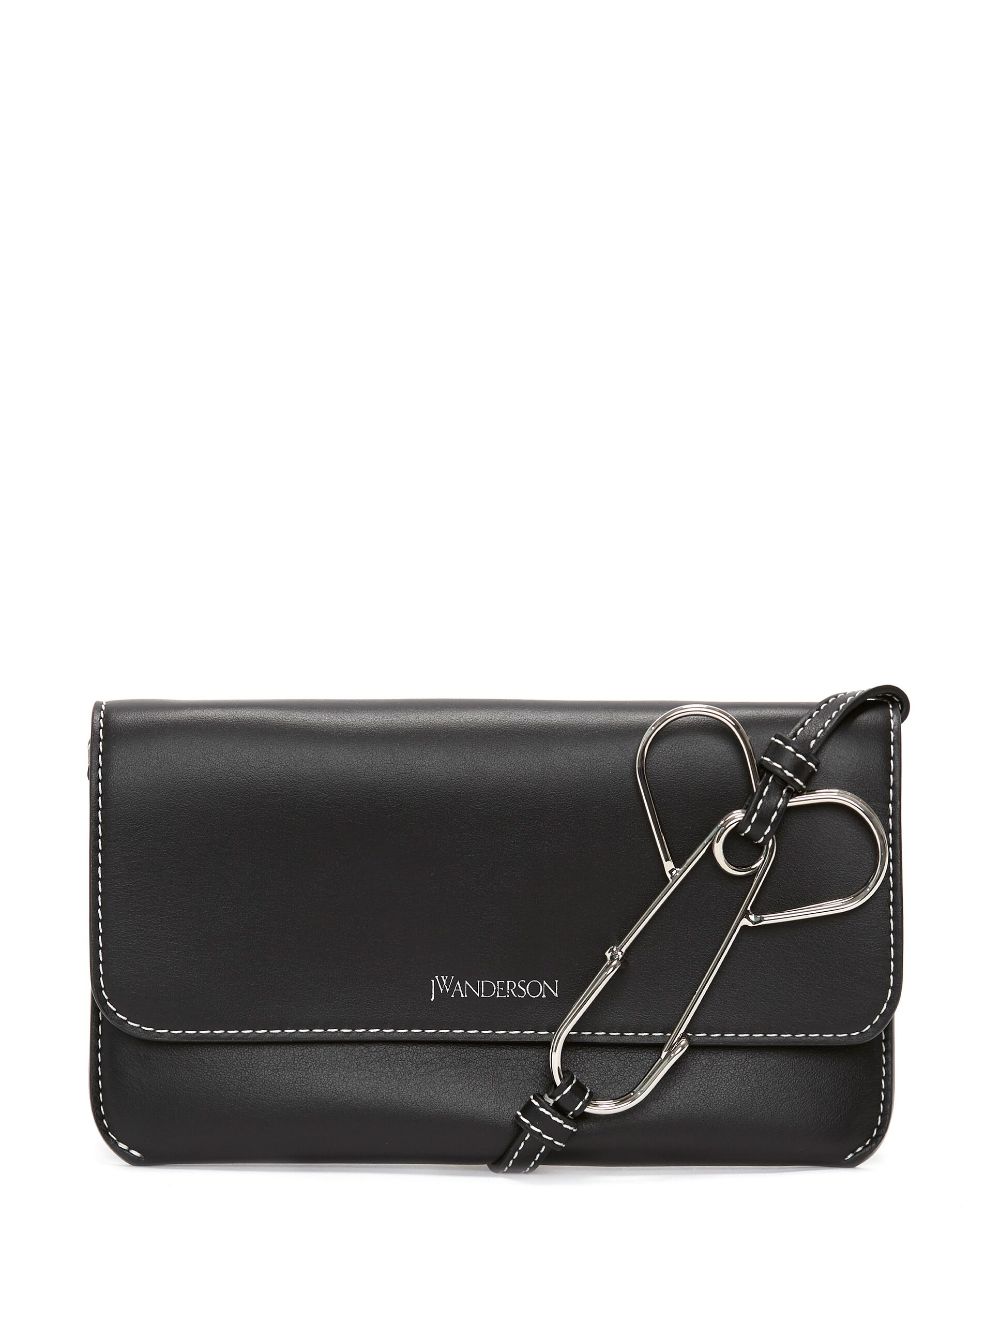 Shop Jw Anderson Phone Leather Pouch Bag In Black